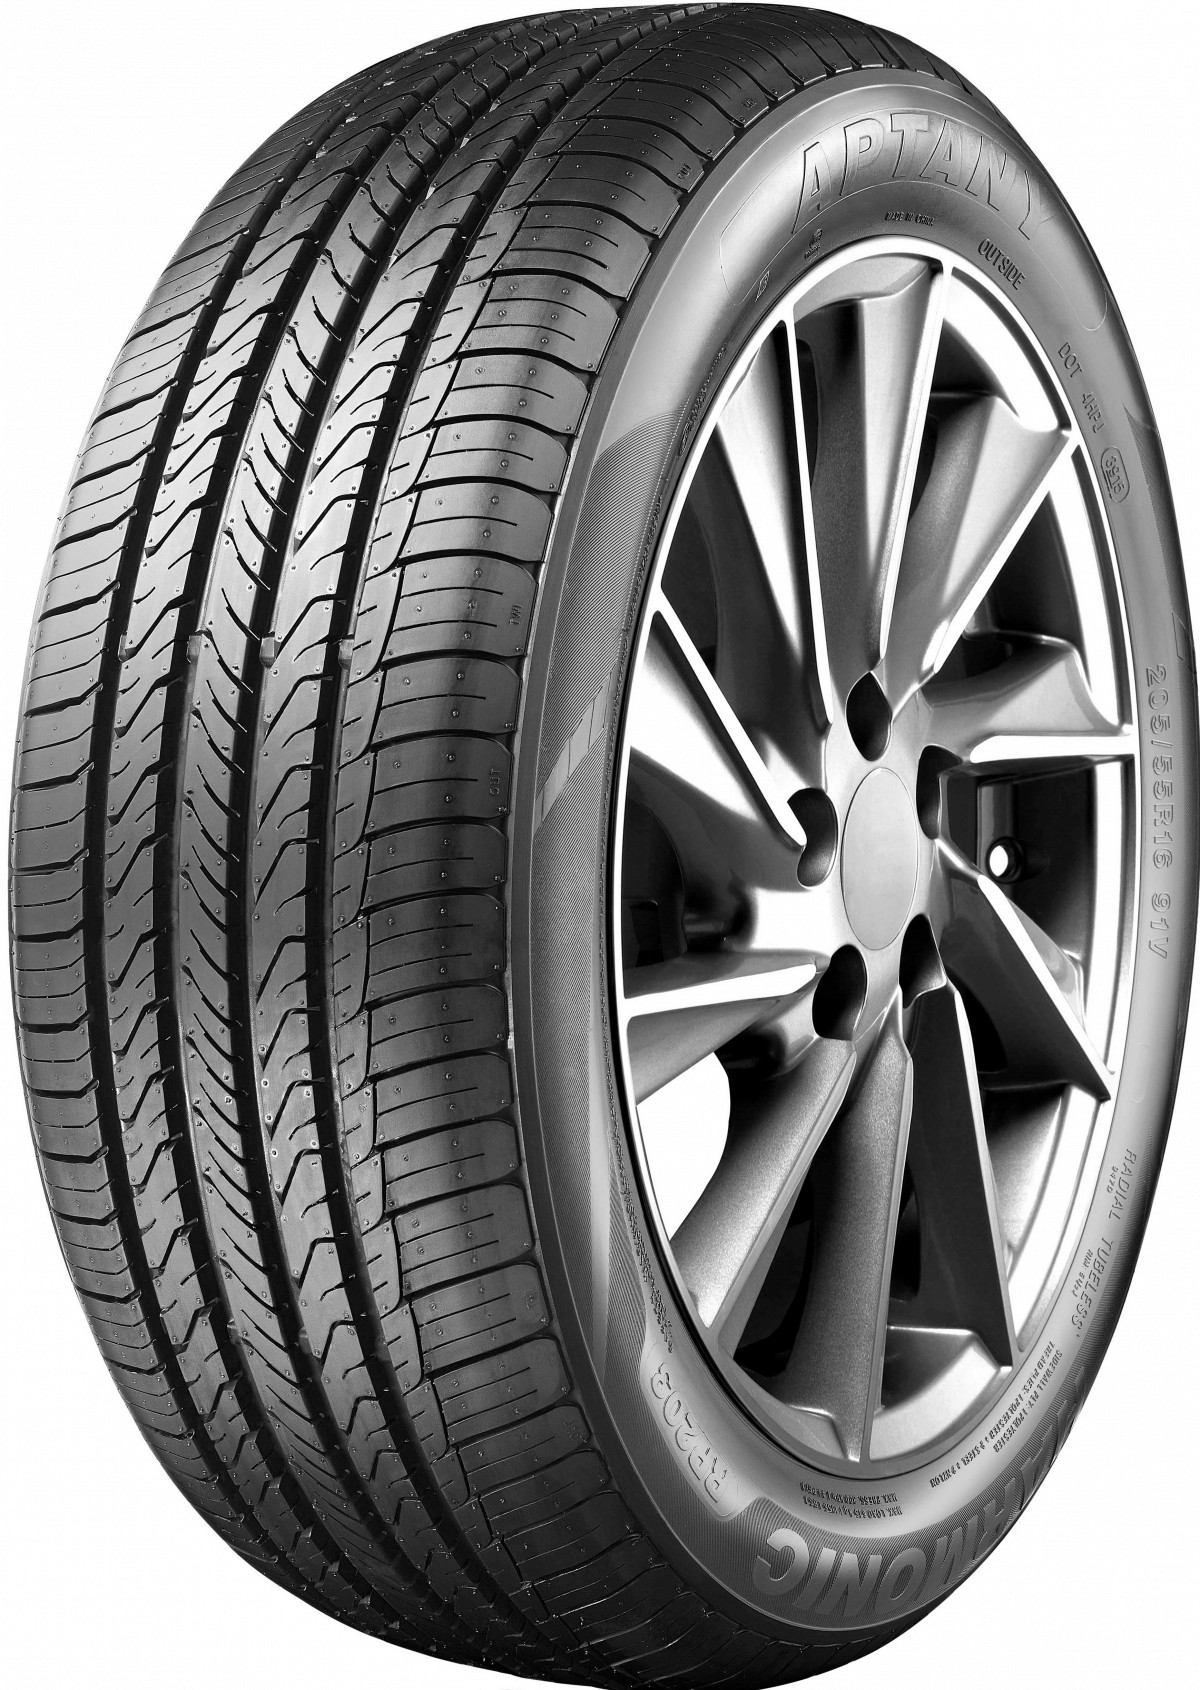 Aptany RP203 Gomme 165 60r14 75H 6972